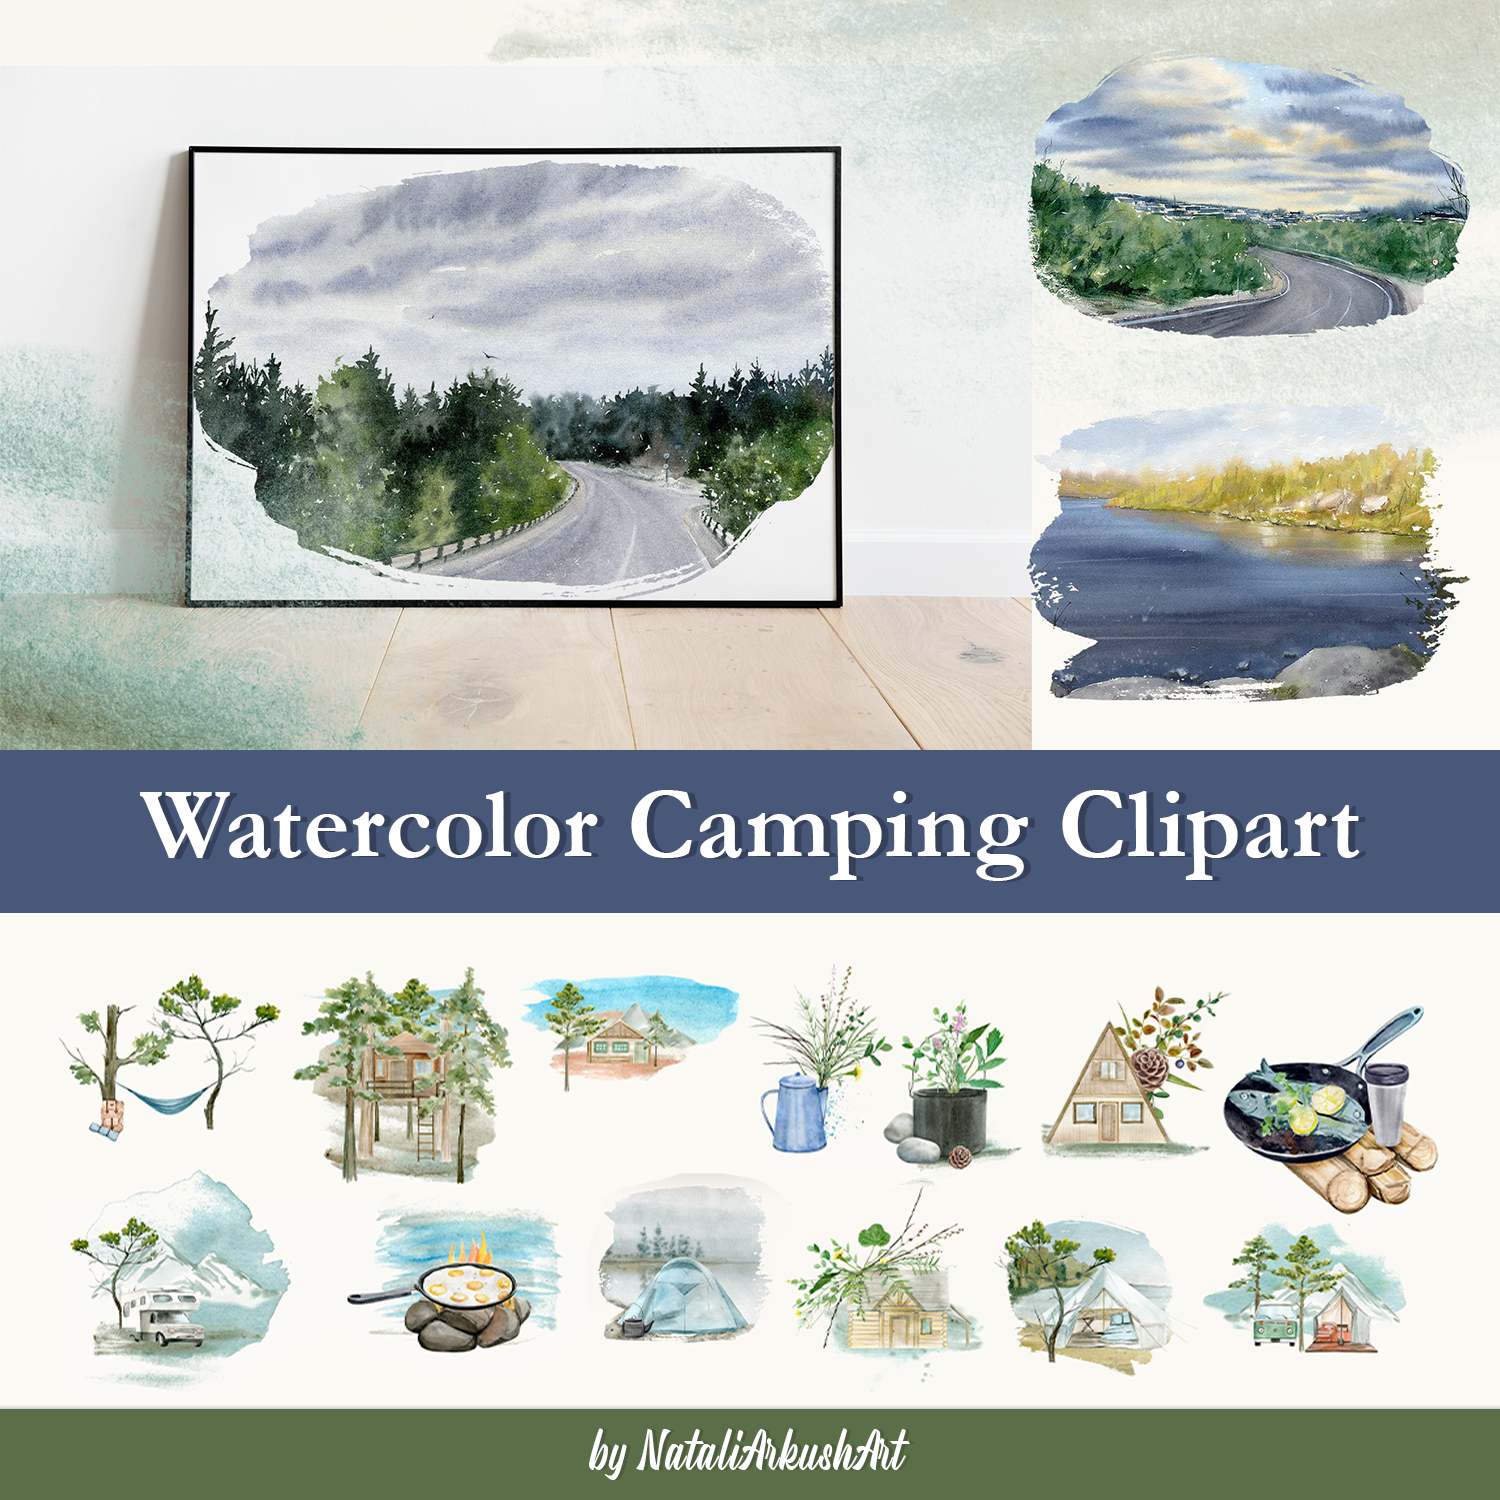 Watercolor camping clipart for facebook.